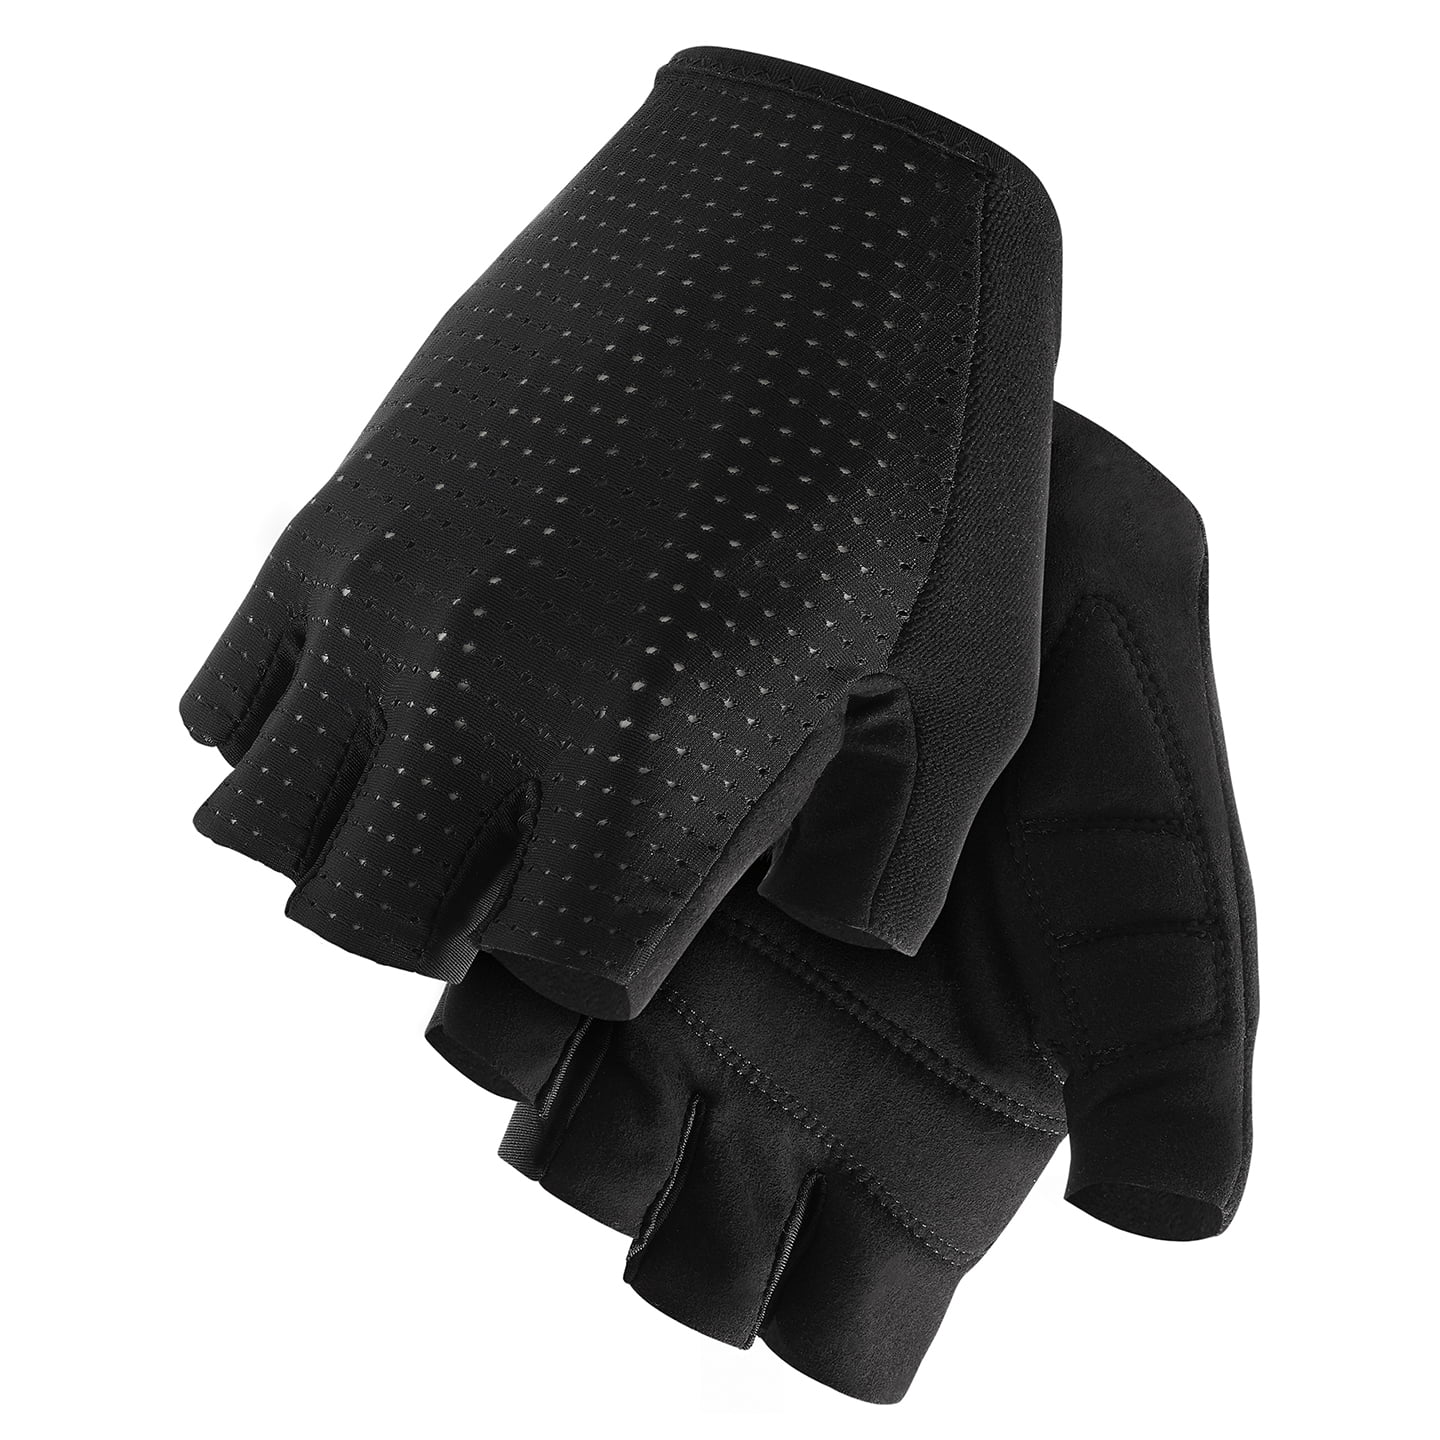 GT C2 Gloves, for men, size M, Cycling gloves, Cycling gear